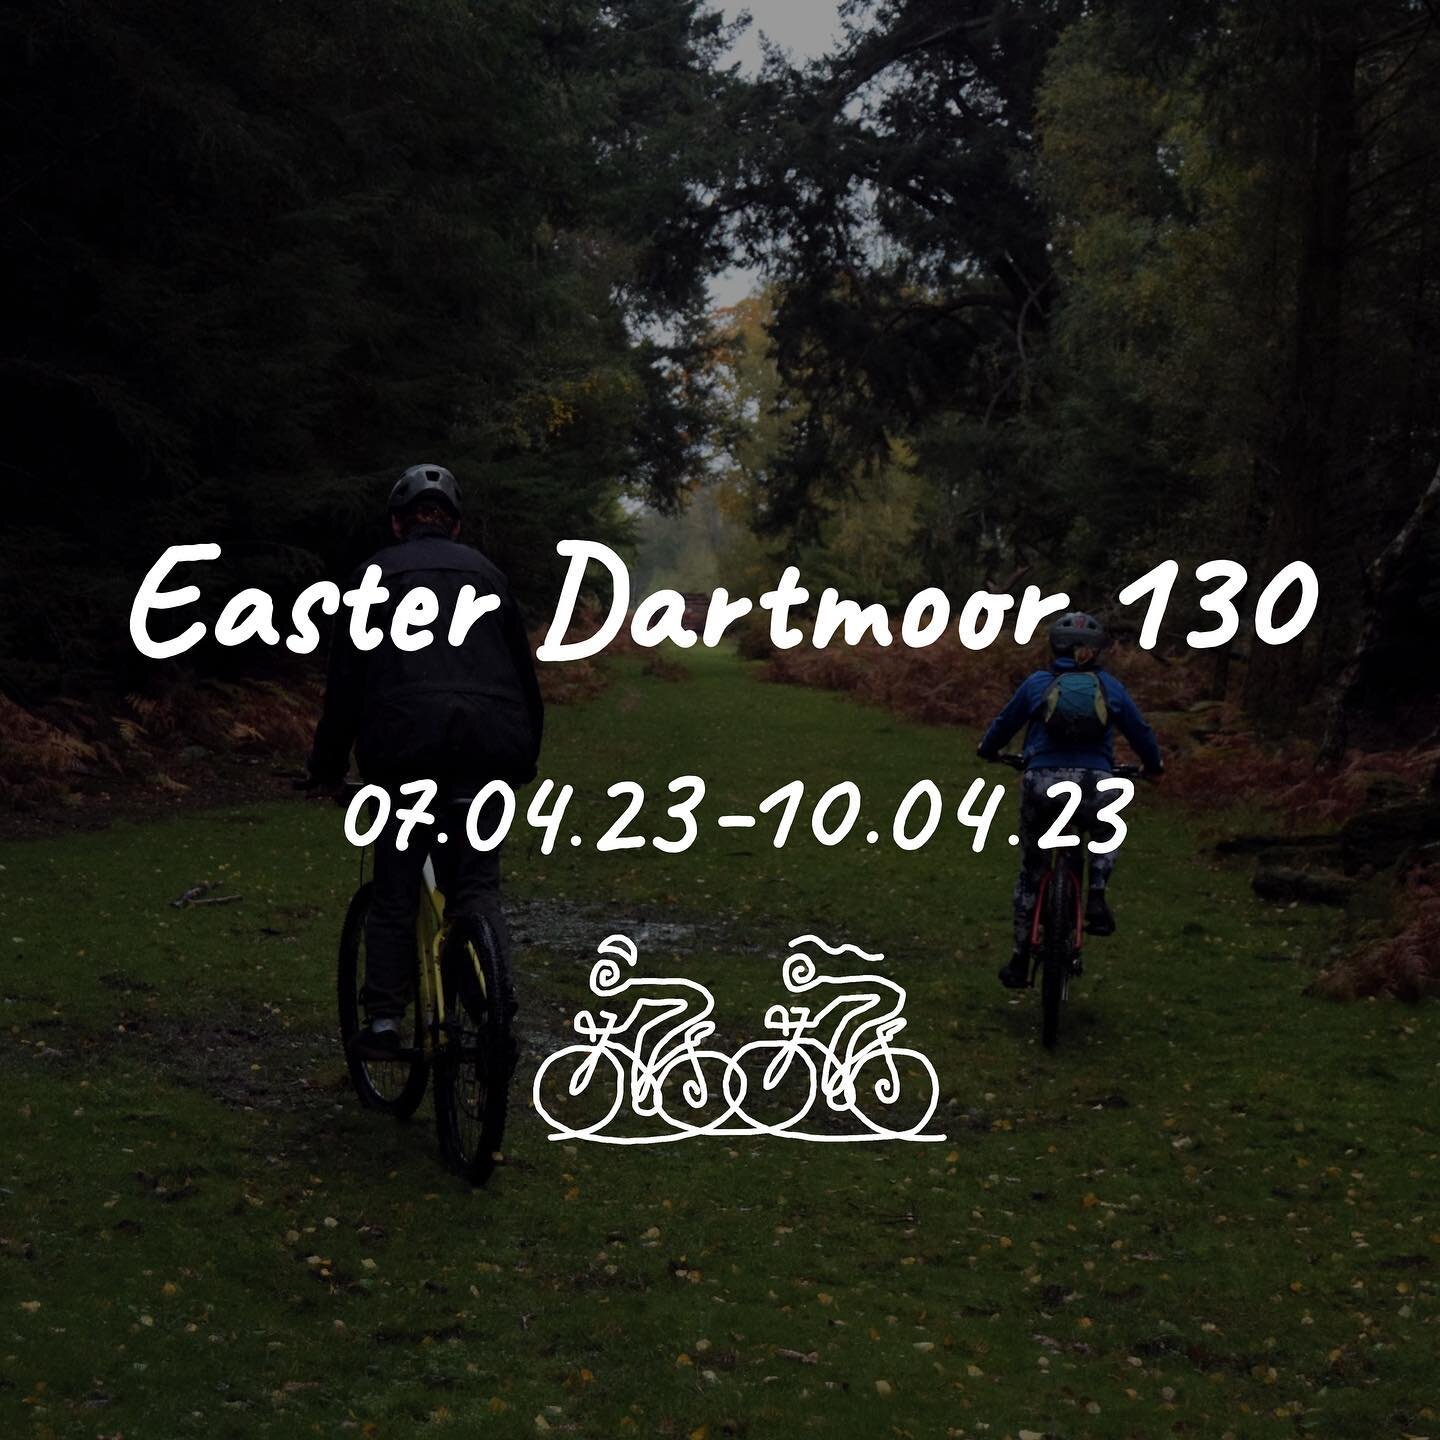 &hellip; do you already have Easter plans? 🐣
@rachelcaverhill is heading to Dartmoor and is inviting five more women / enbies to join her in this adventure ⛰🚴&zwj;♀️

The route starts in Moretonhampstead with the potential for a field to camp in on